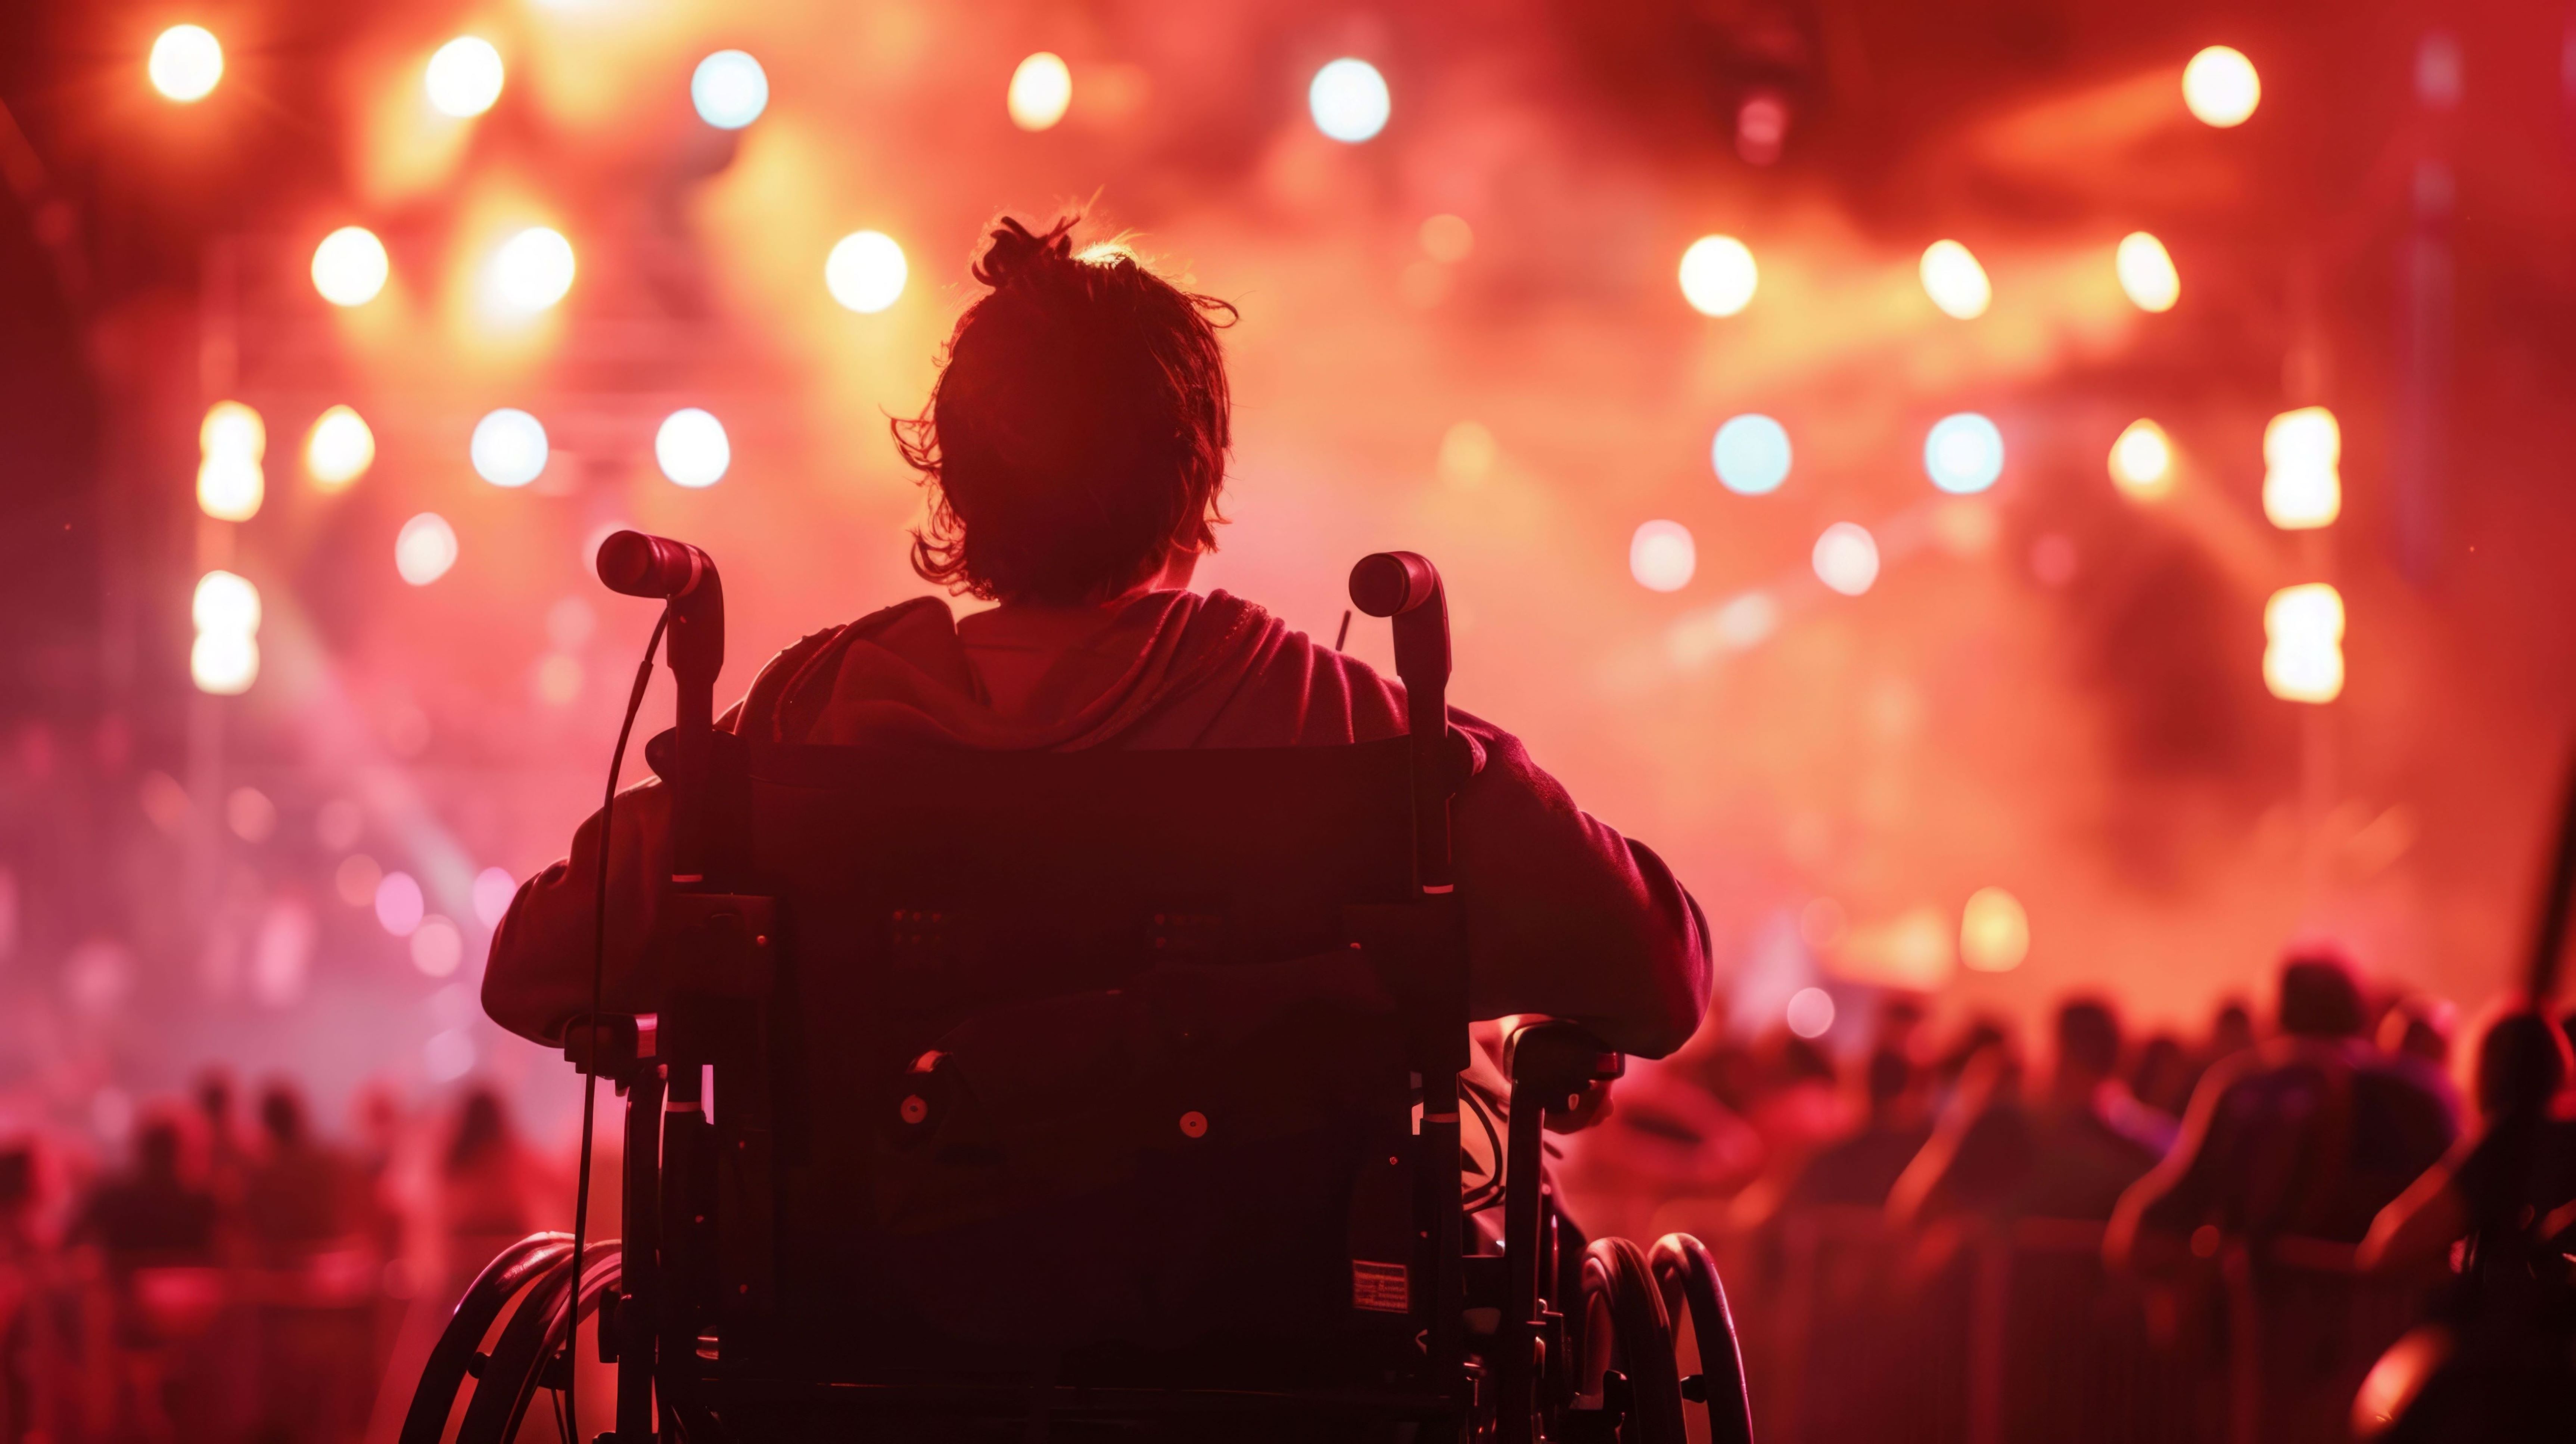  The image shows a person in a wheelchair facing a brightly lit stage at a concert. The background features an audience with colorful, vibrant lighting creating an energetic atmosphere. The person is positioned centrally, highlighting the inclusive environment of the event.